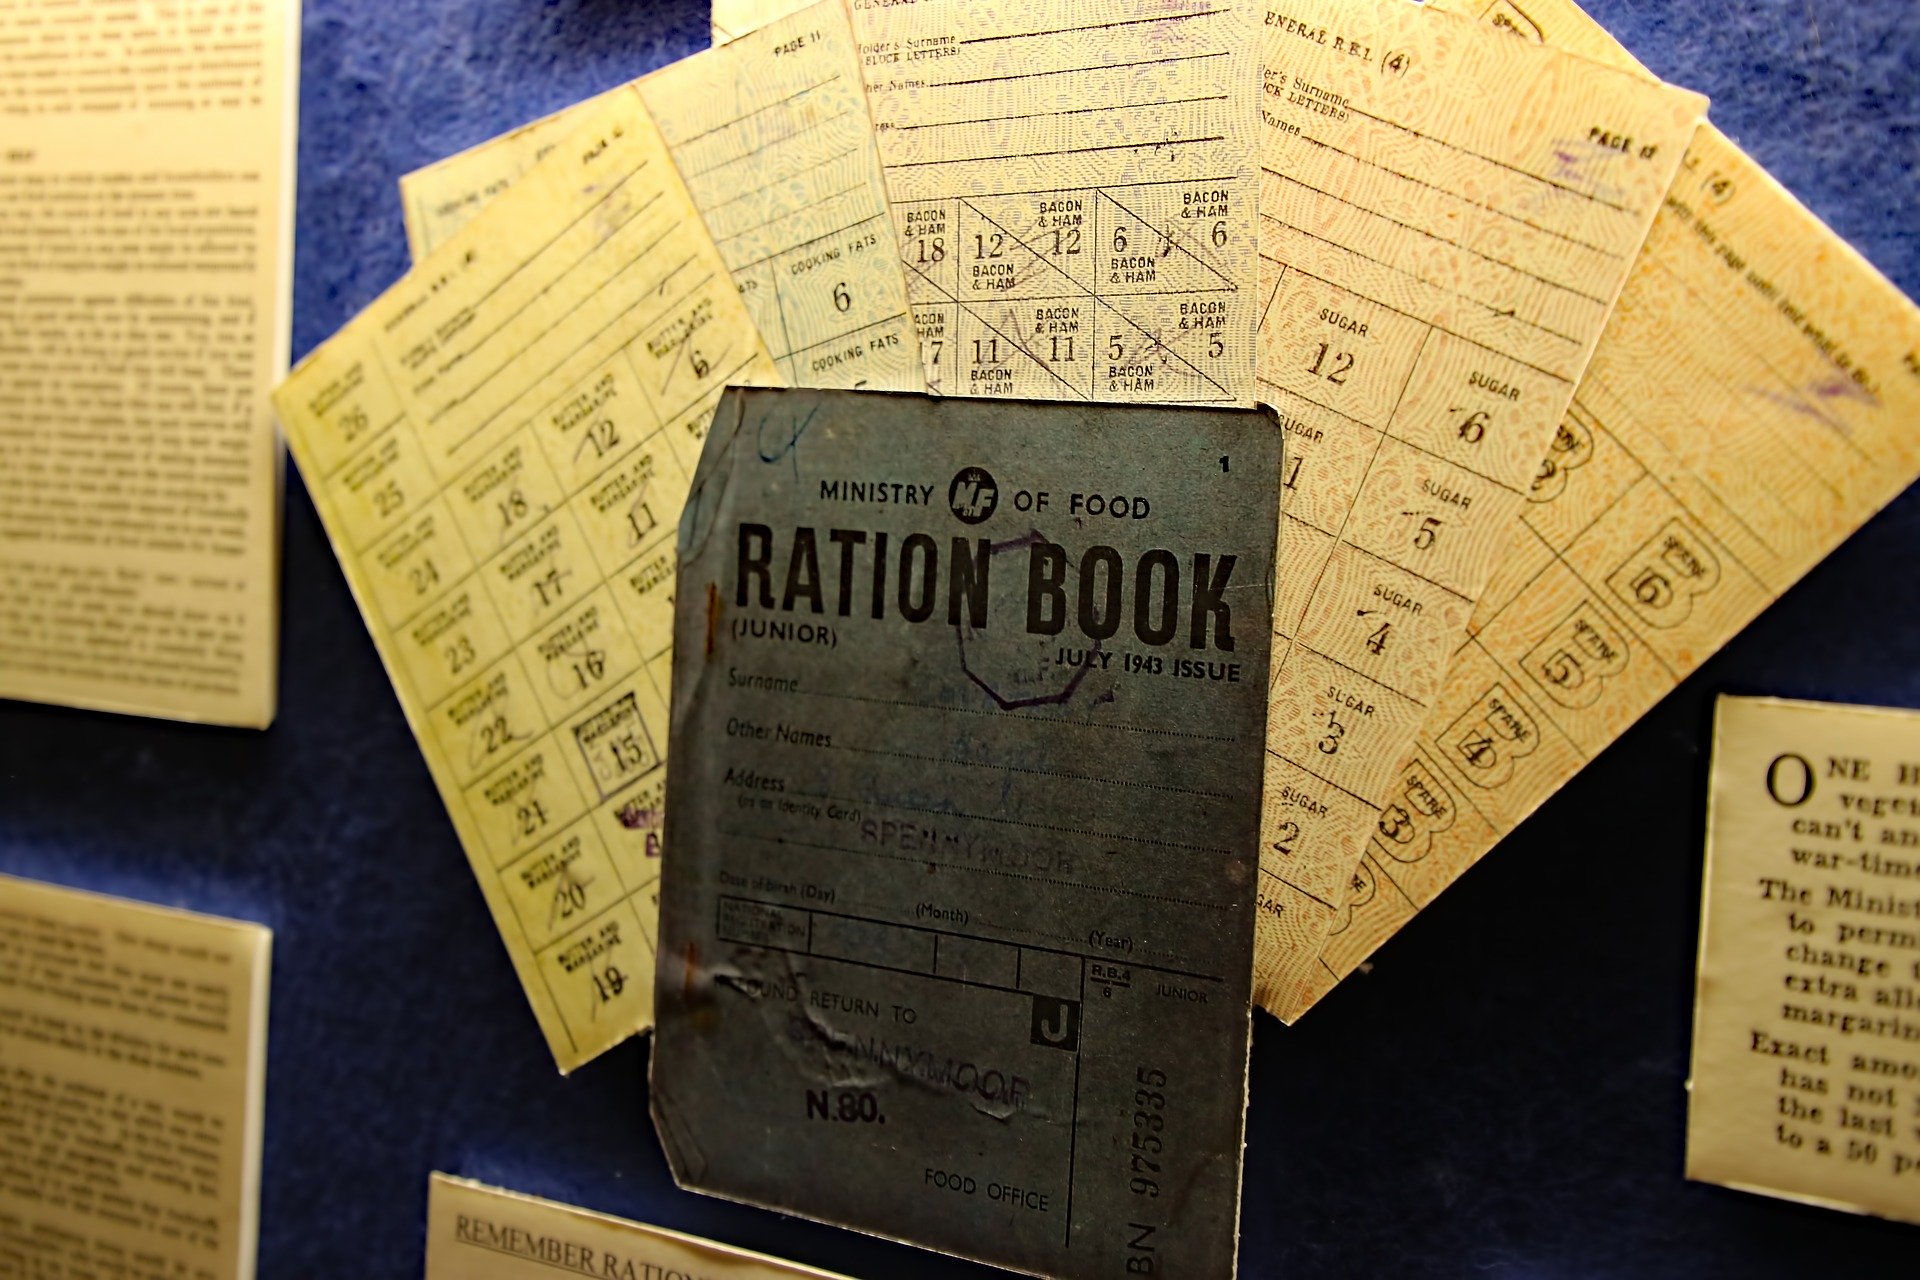 VE DAY RATION RECIPES